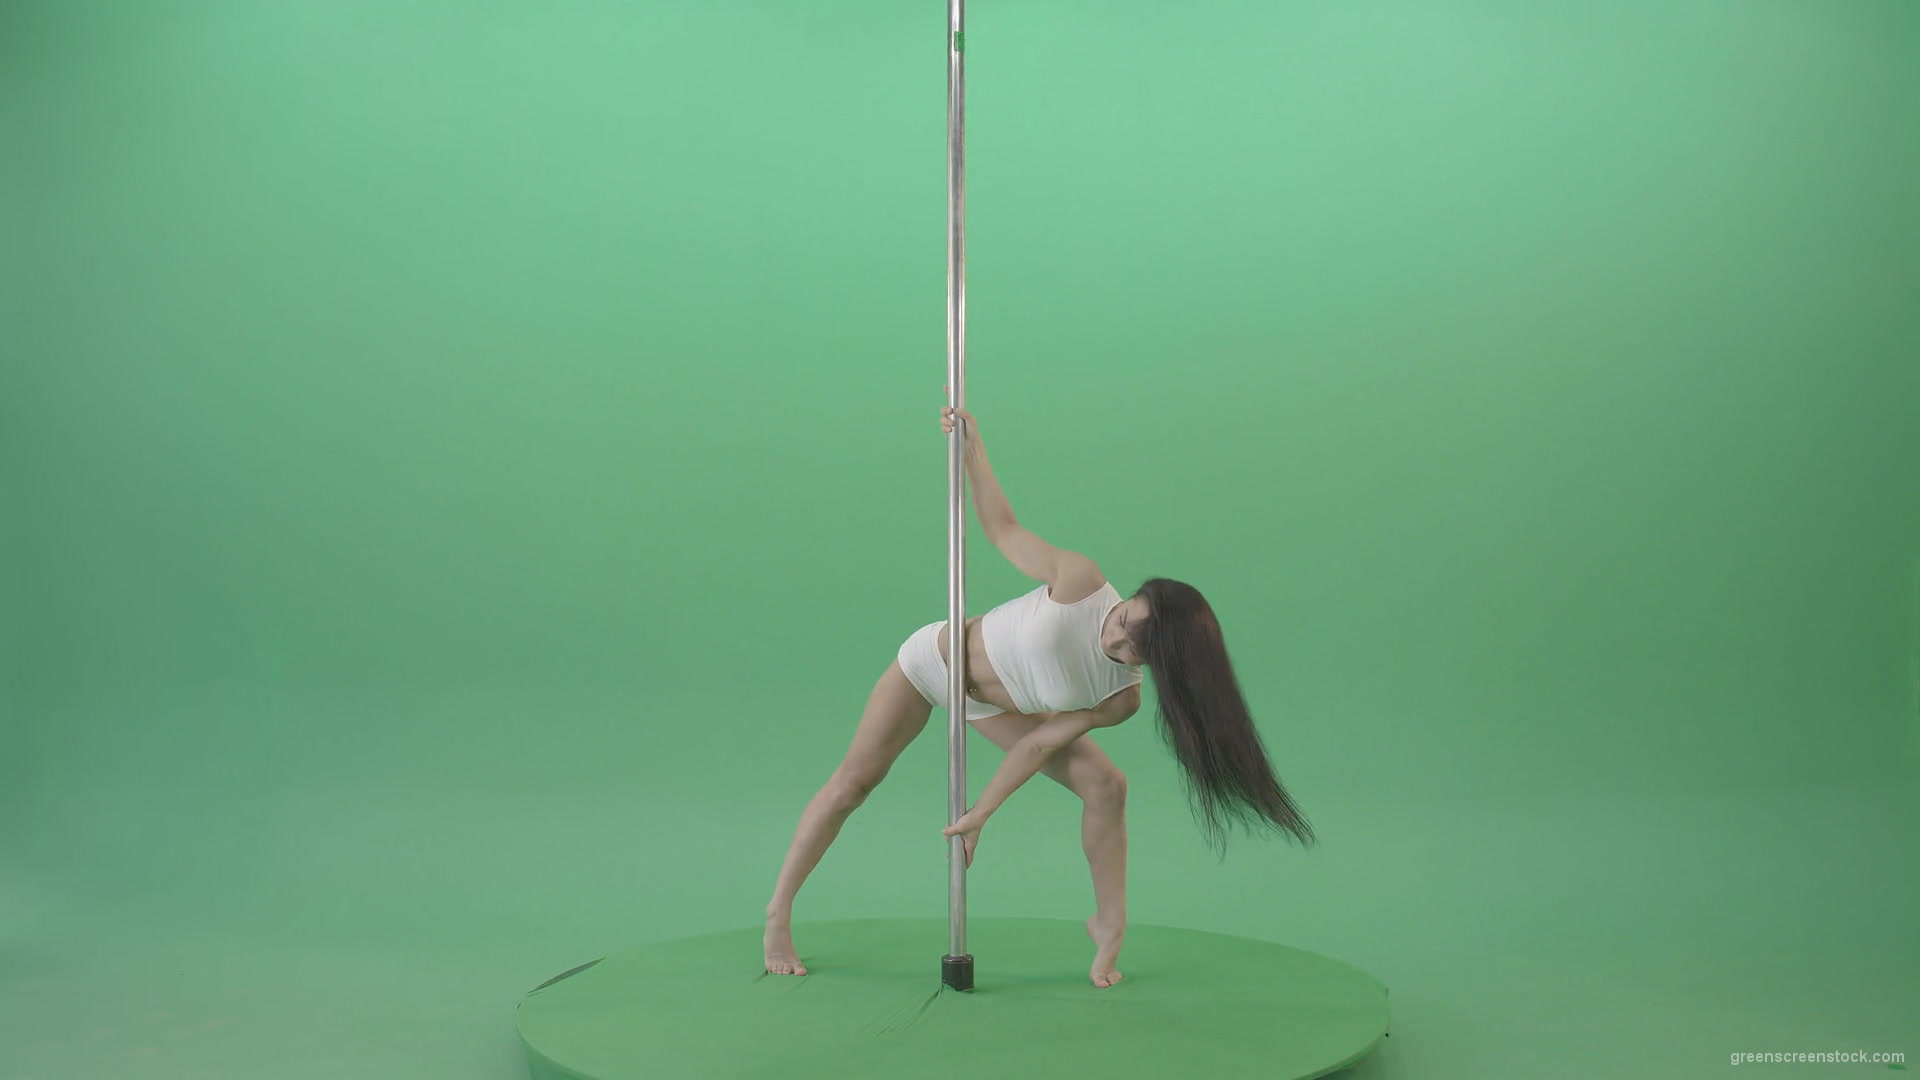 Dark-Hair-Girl-in-White-body-dress-underwear-spinning-on-the-pilon-showing-exotic-dance-over-green-screen-4K-Video-Footage-1920_009 Green Screen Stock